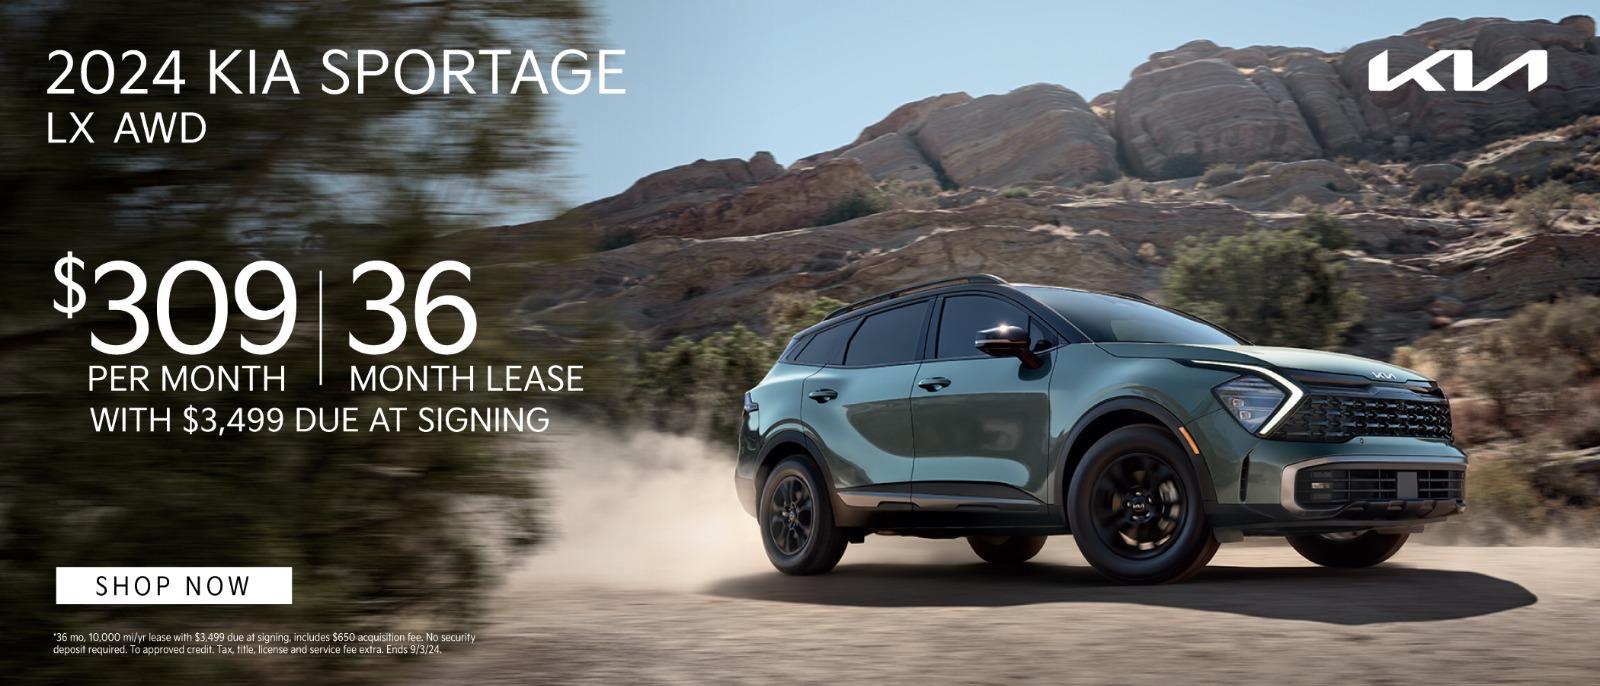 2024 Kia Sportage lease for $309 per month for 36 months